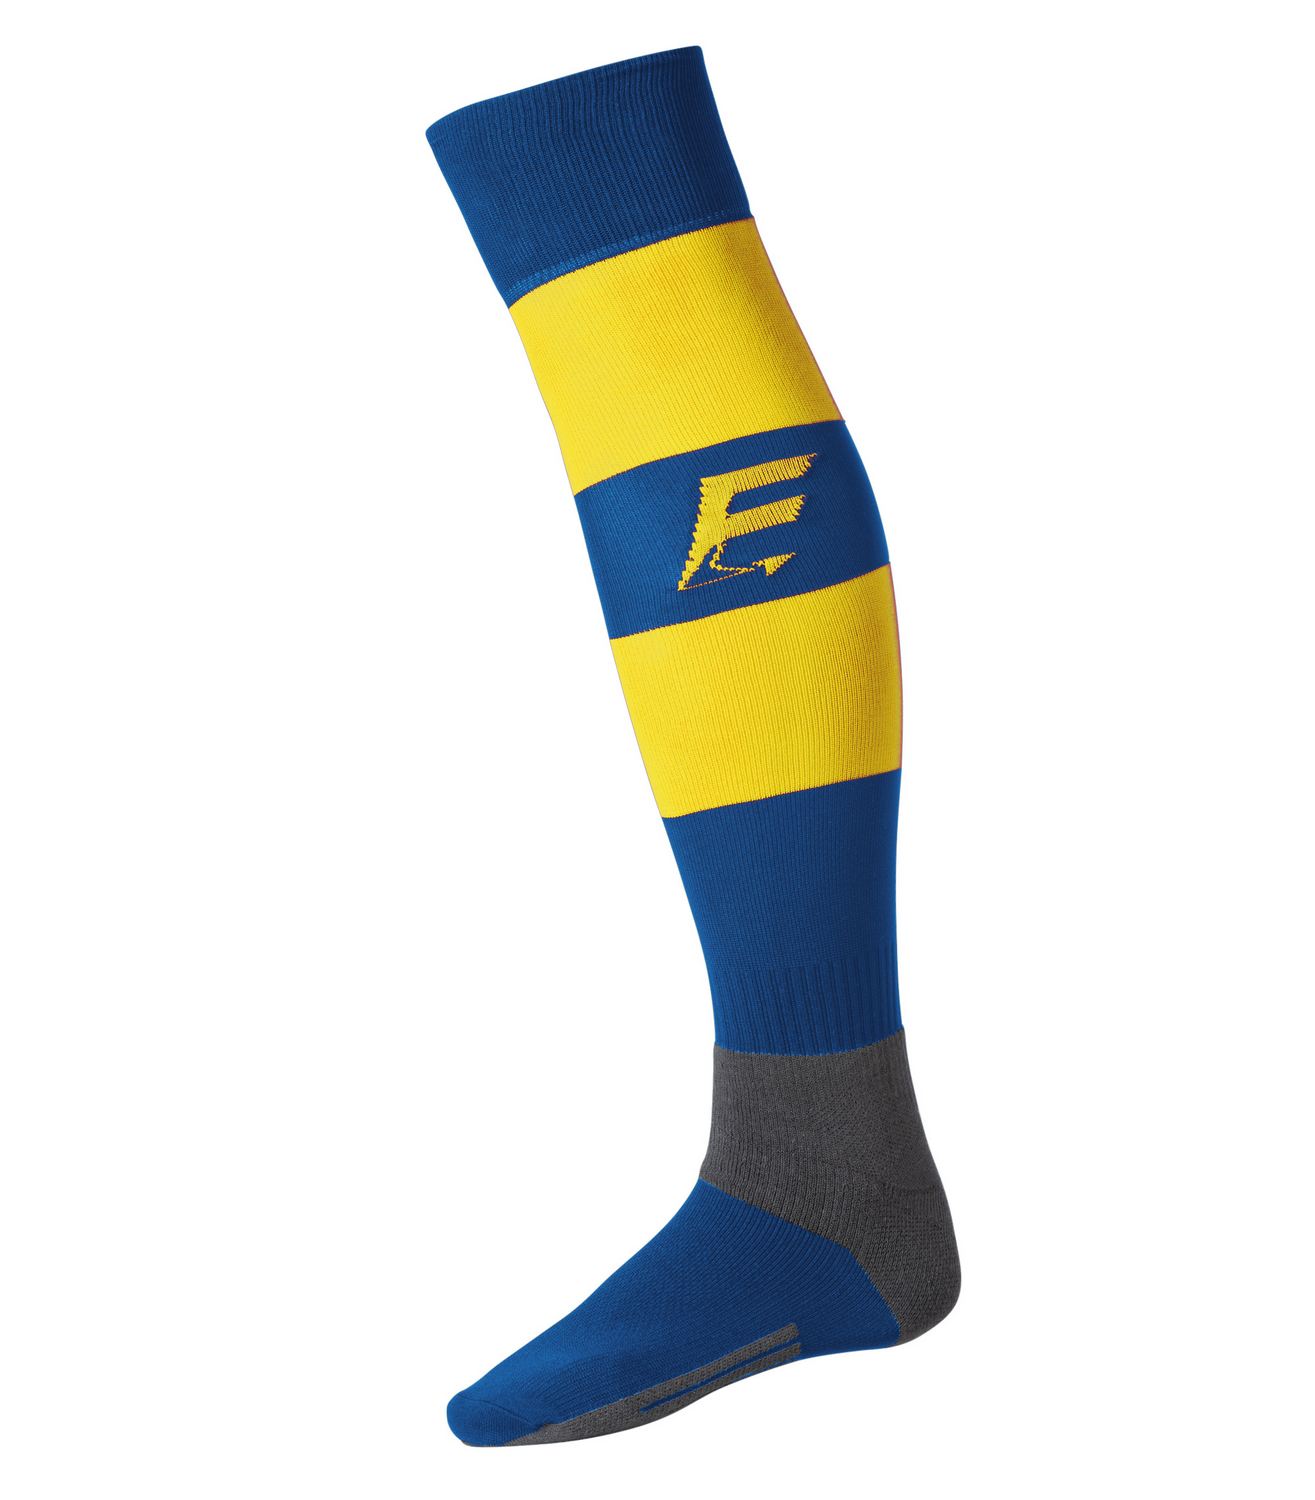 FORCE XV CHAUSSETTES DE RUGBY RAYEES Roy-Jaune